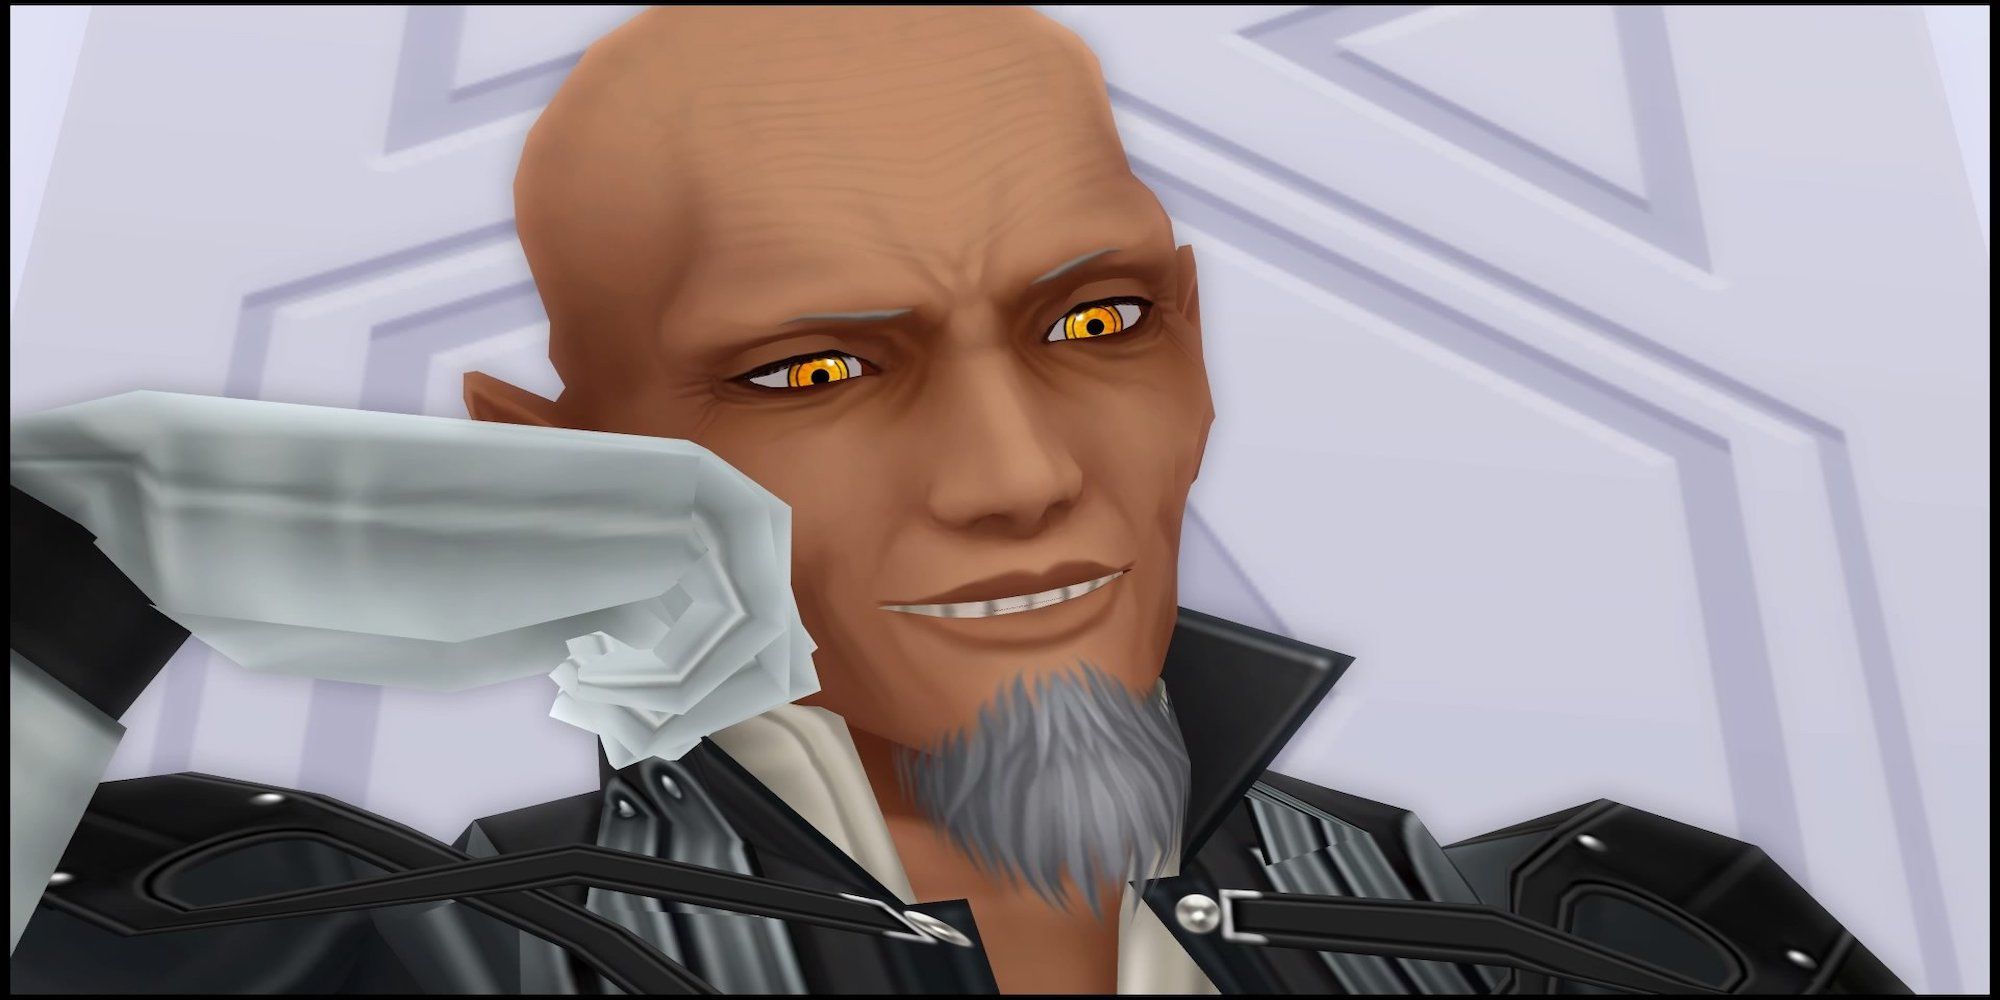 Master Xehanort from the Kingdom Hearts Series